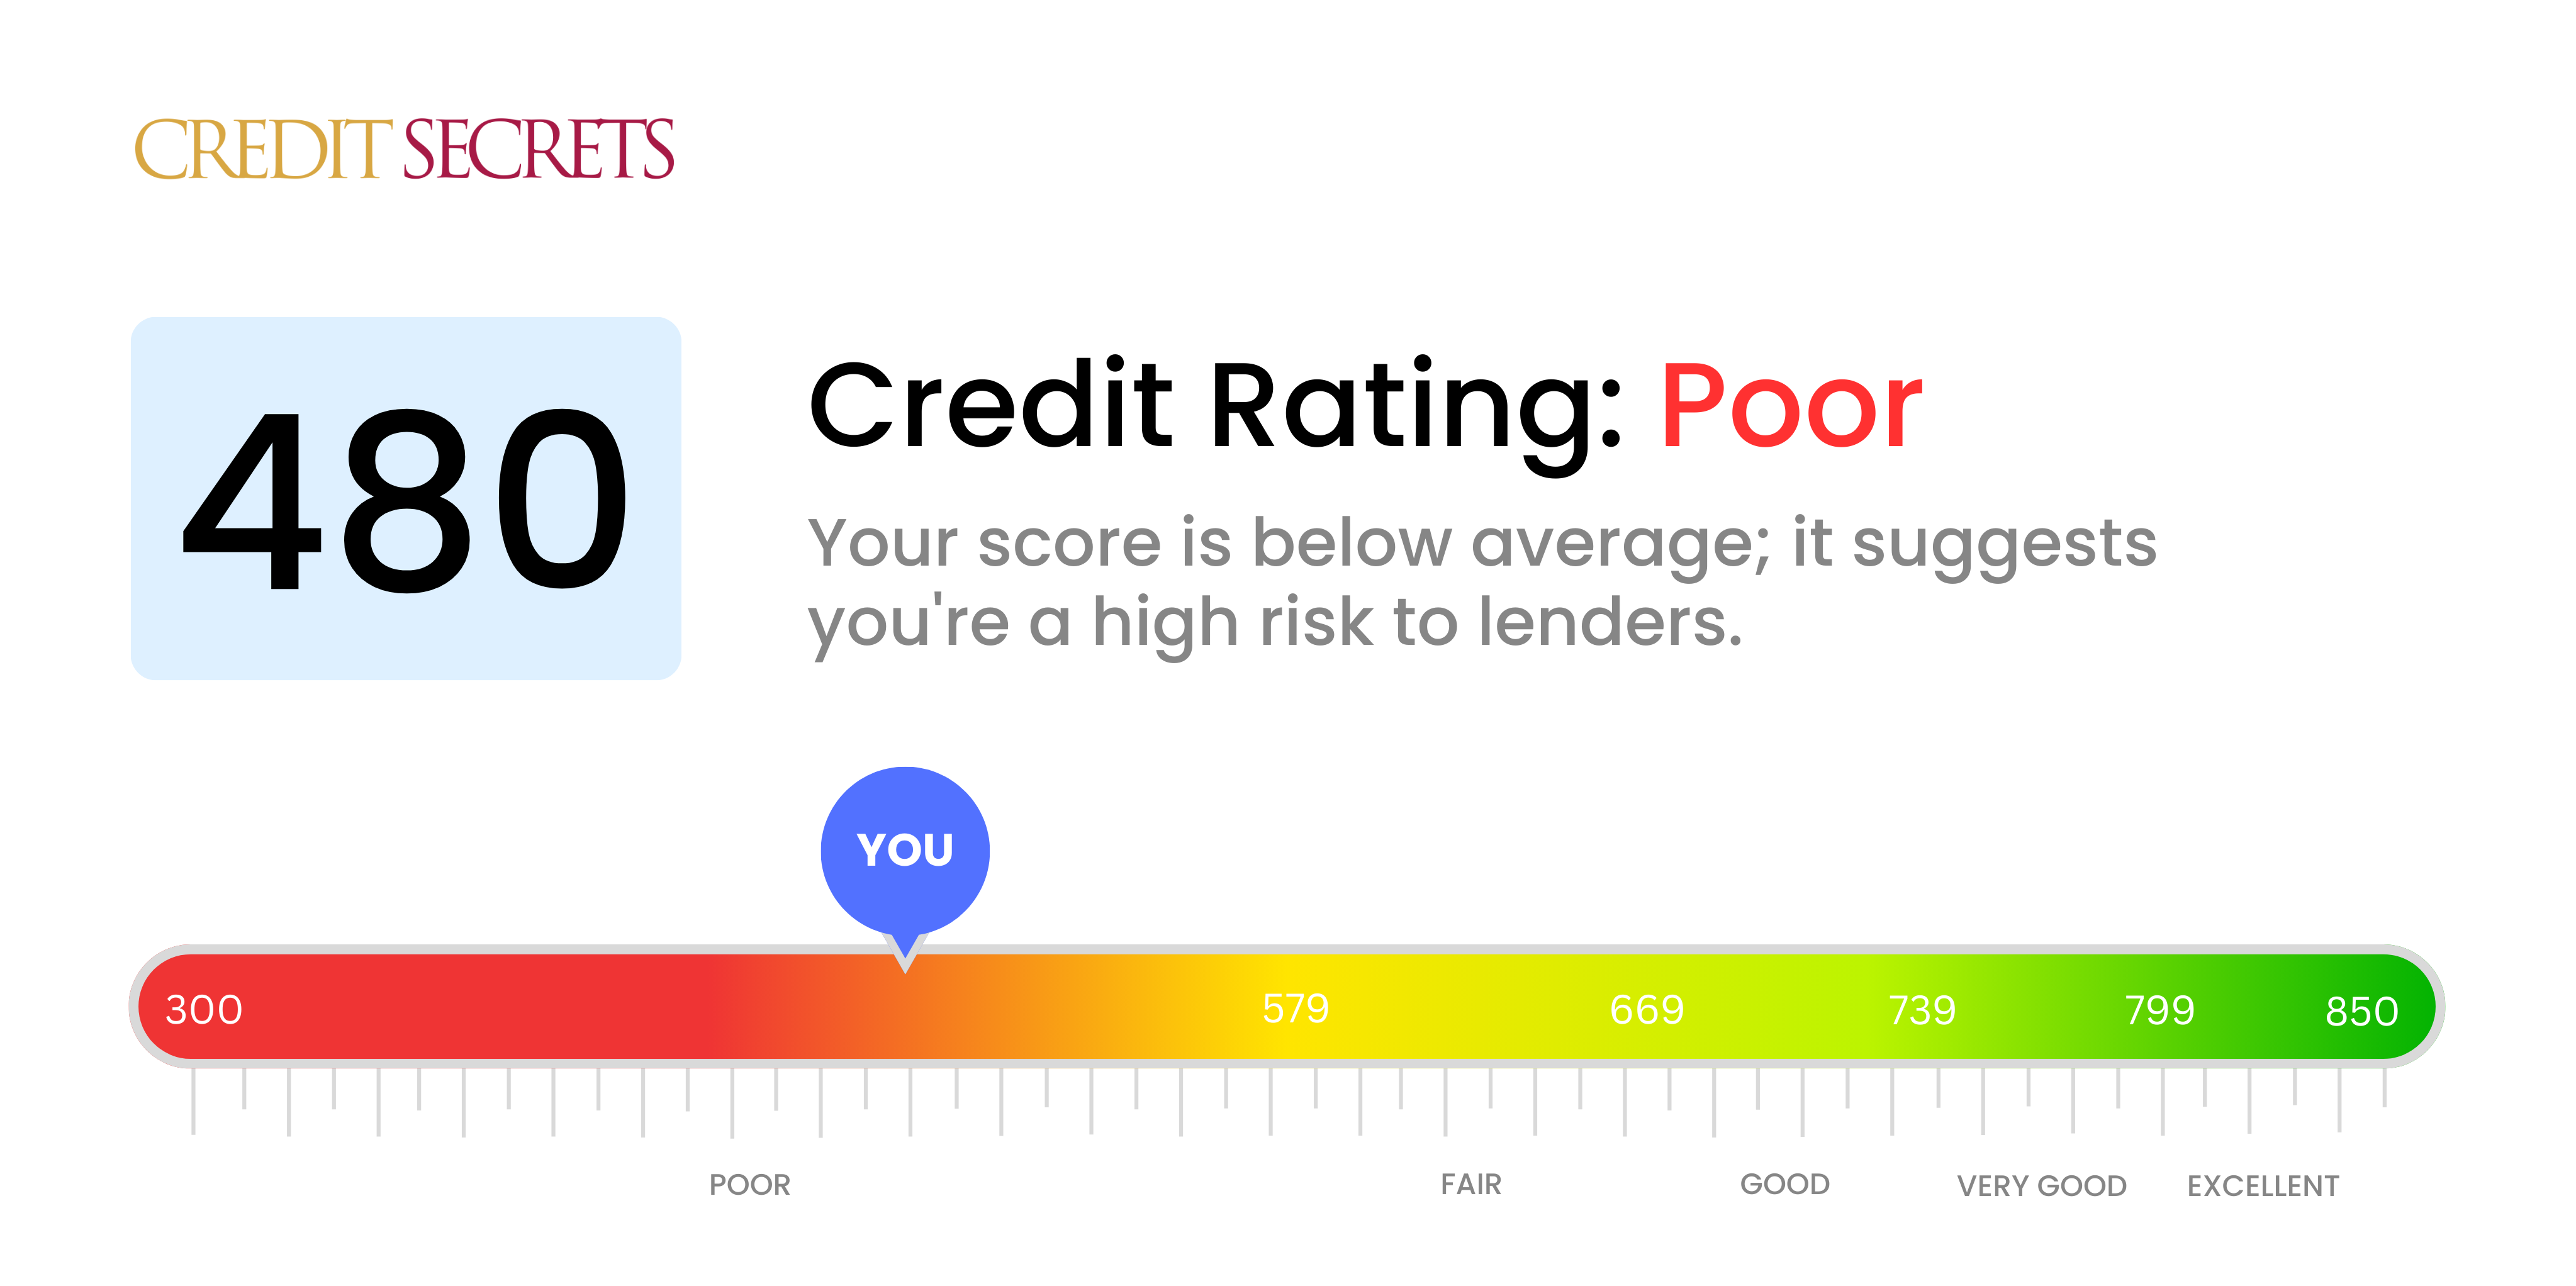 Is 480 a good credit score?